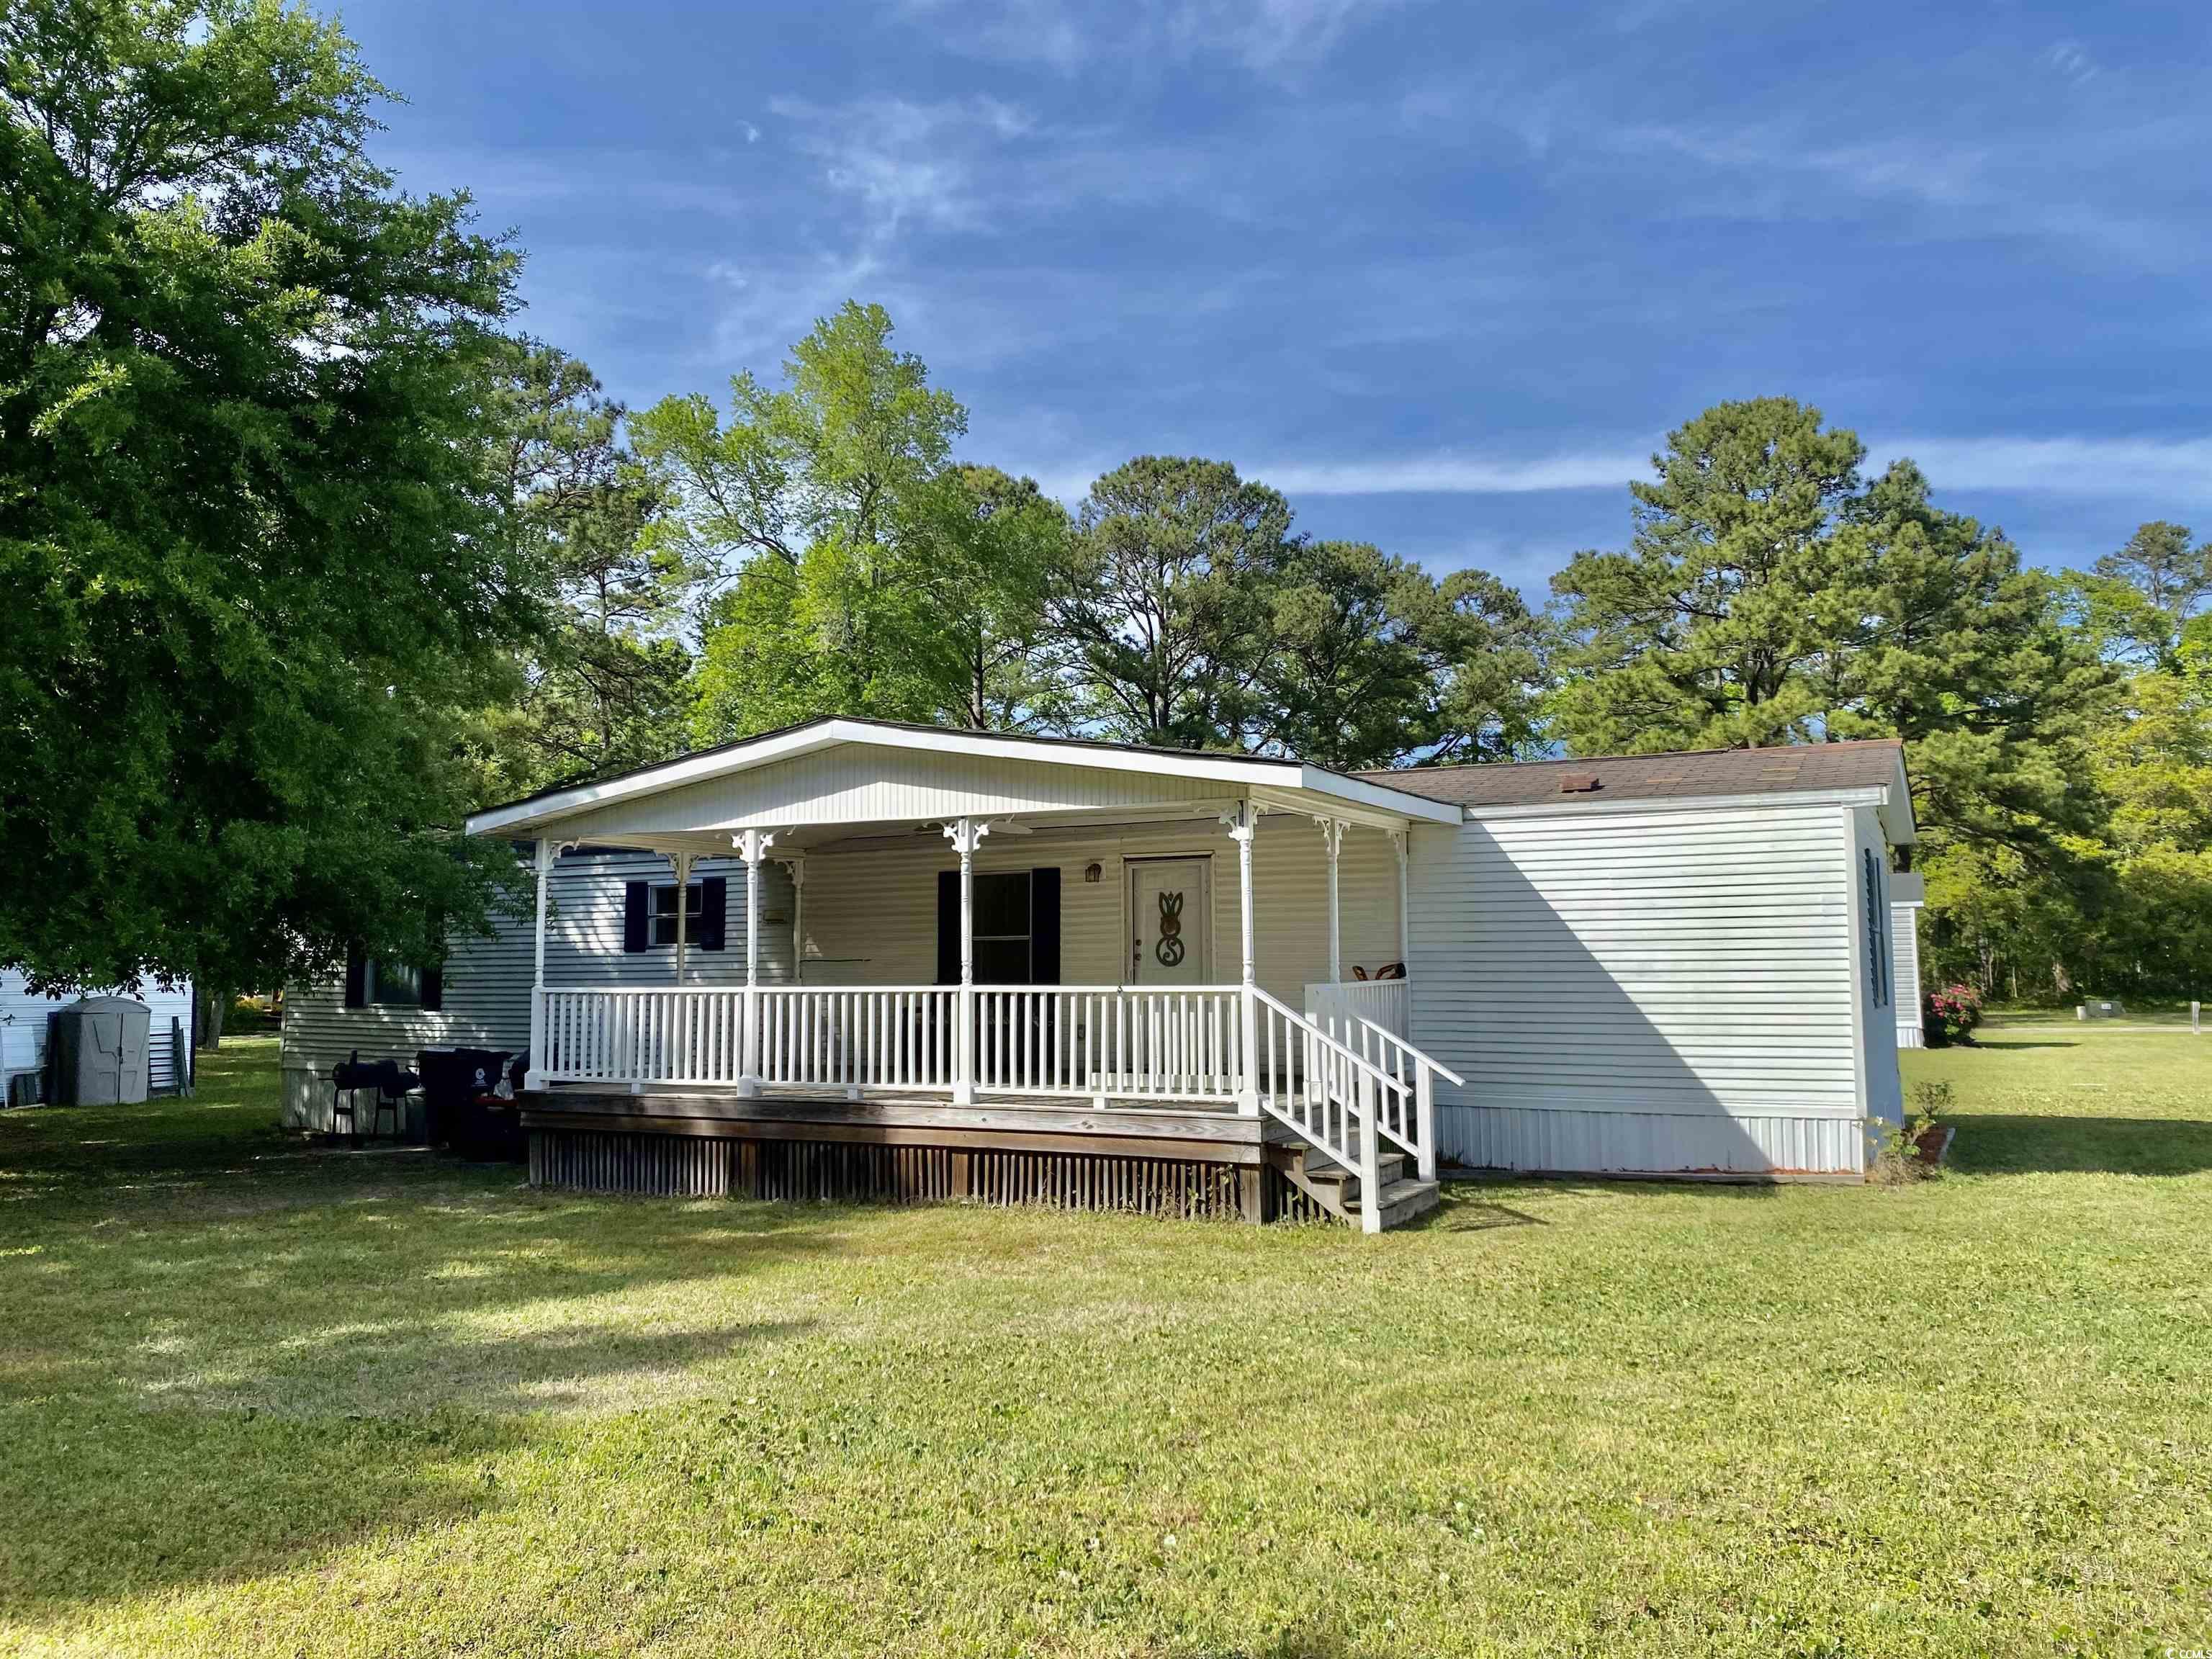 charming & well maintained 2bd/2ba manufactured home centrally located in the heart of beautiful murrells inlet, only minutes to beach, shopping and marsh walk. home is located on a large, spacious lot tucked away in a peaceful, upscale mobile home community. home features xl living area, vaulted ceilings, new laminate flooring throughout,2018 new hvac, 2023 new hot water tank, split floor plan, large porch on front of home as well as a back porch, carport for parking. relax under the shade of beautiful trees, nice outside storage unit conveys. no hoa here just the land lease! this home wont last long! 55 and over community  call to schedule a showing today! welcome home!